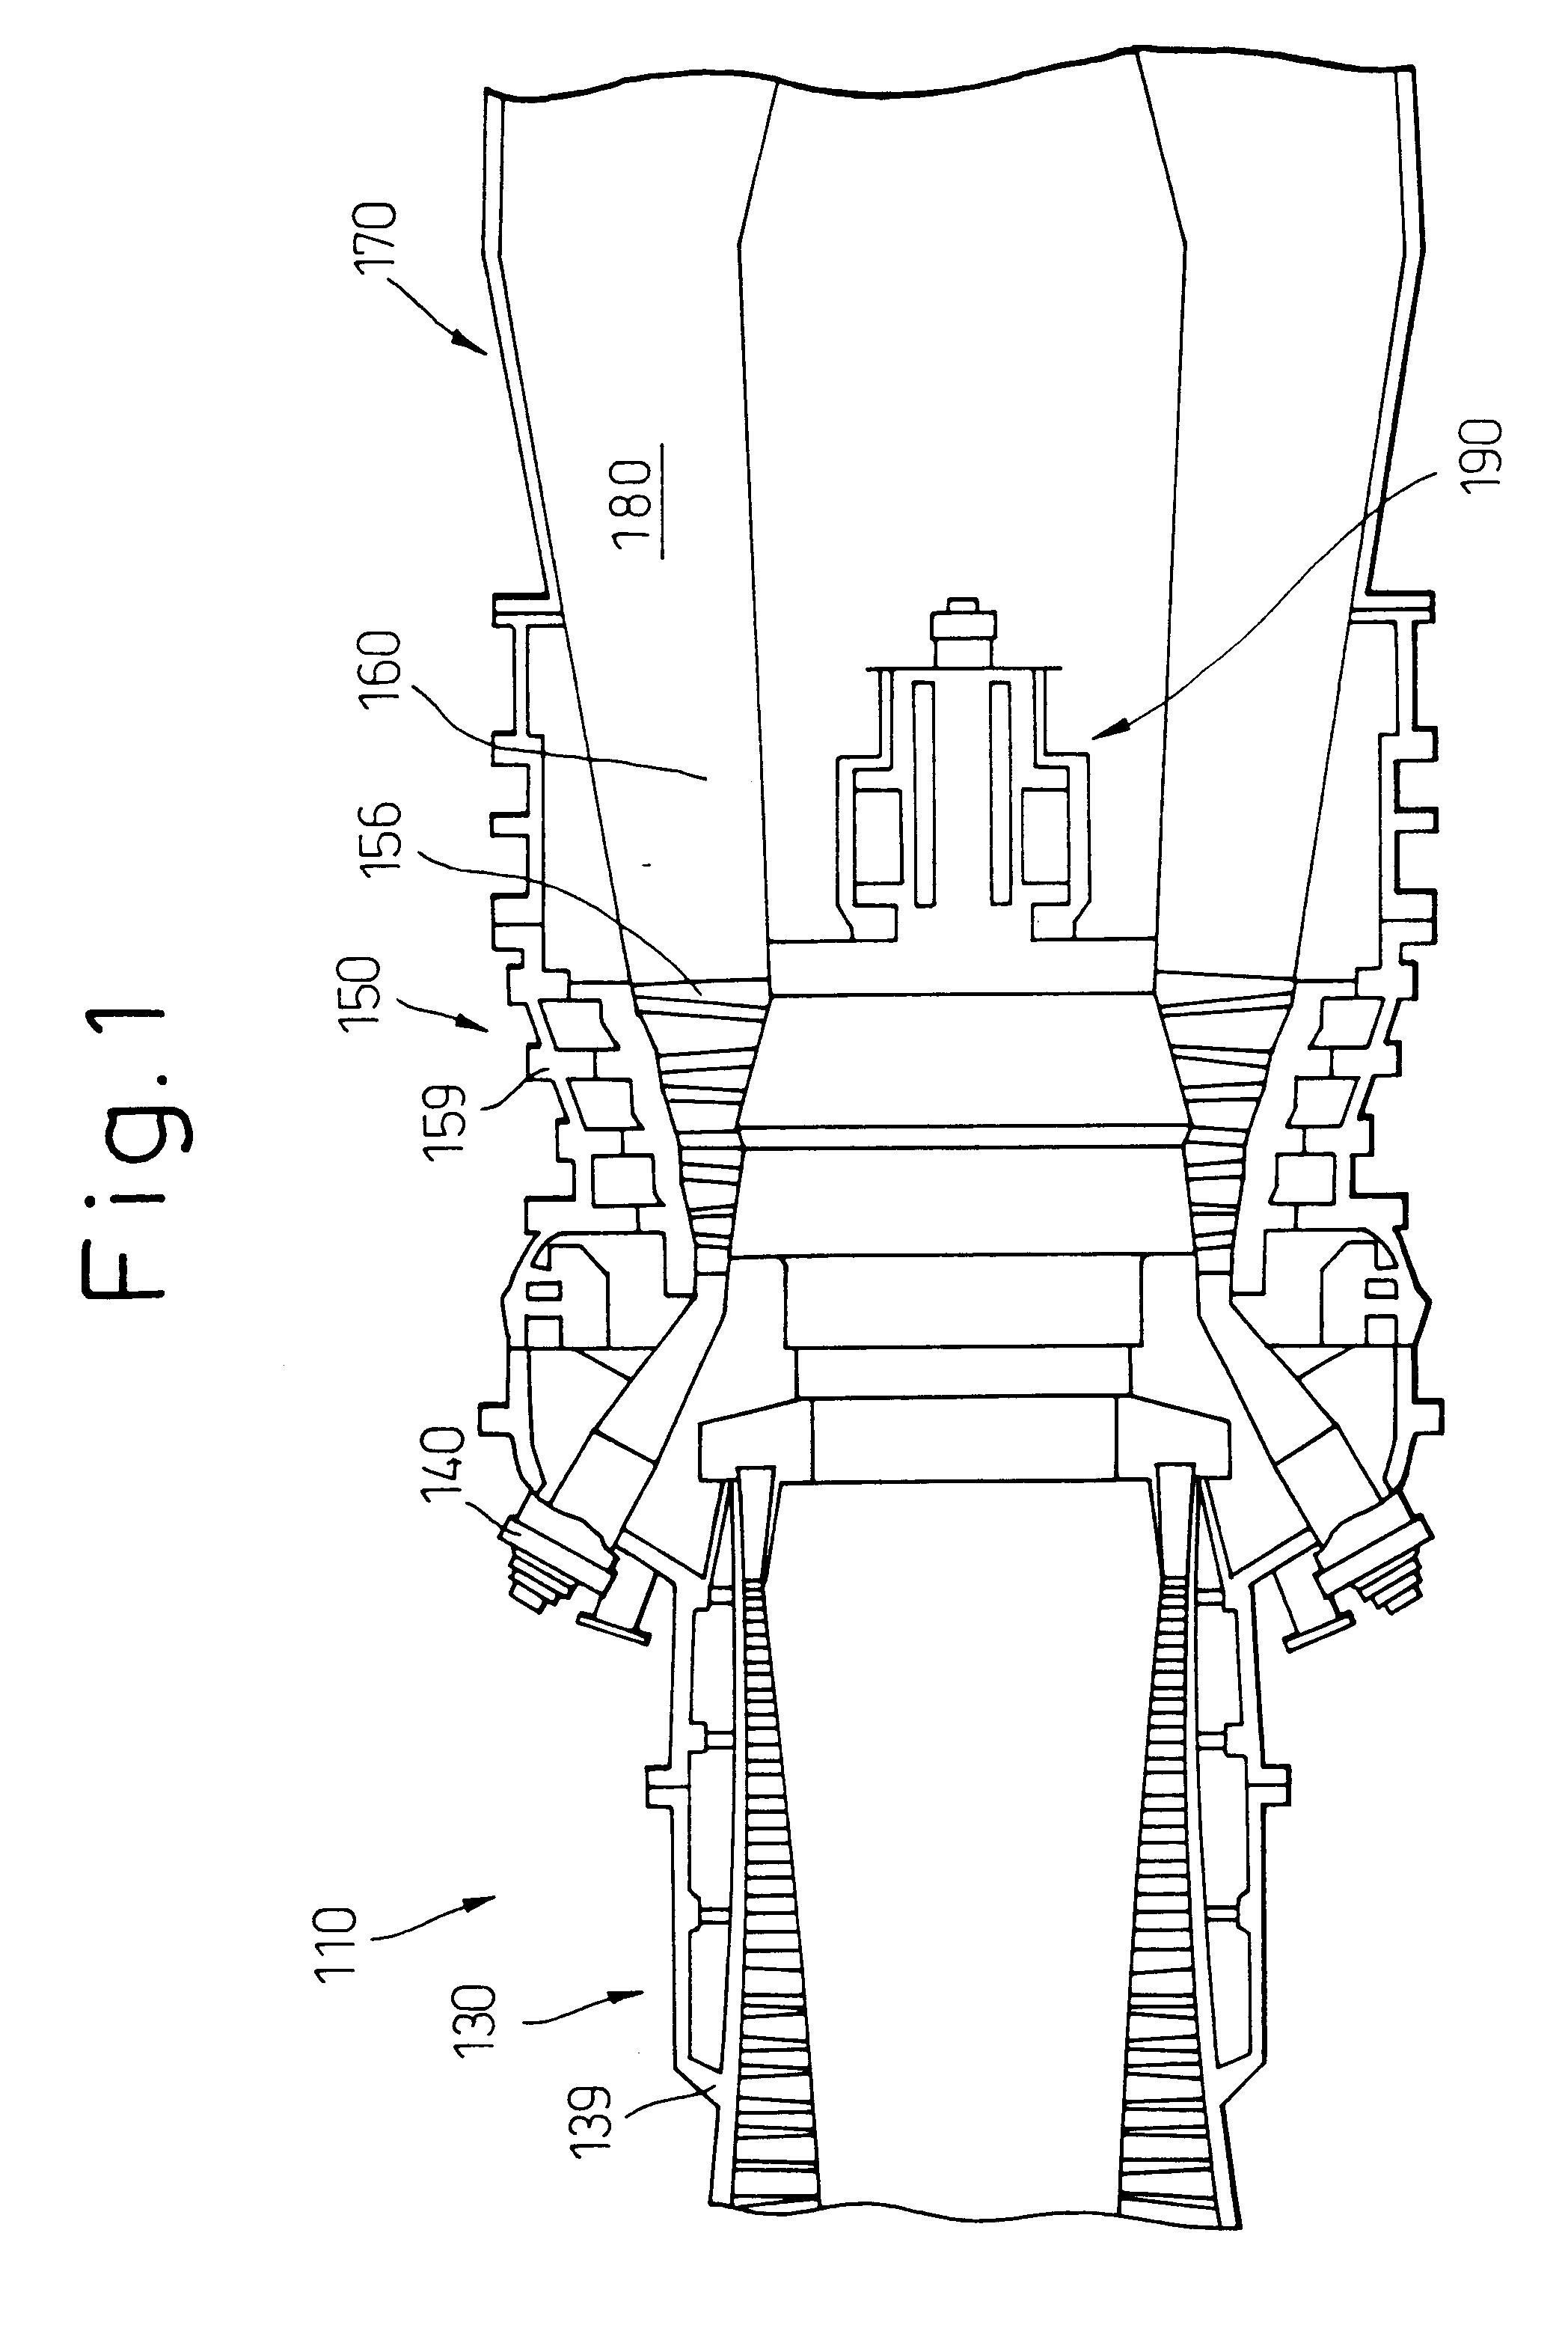 Axial-flow turbine having stepped portion formed in axial-flow turbine passage